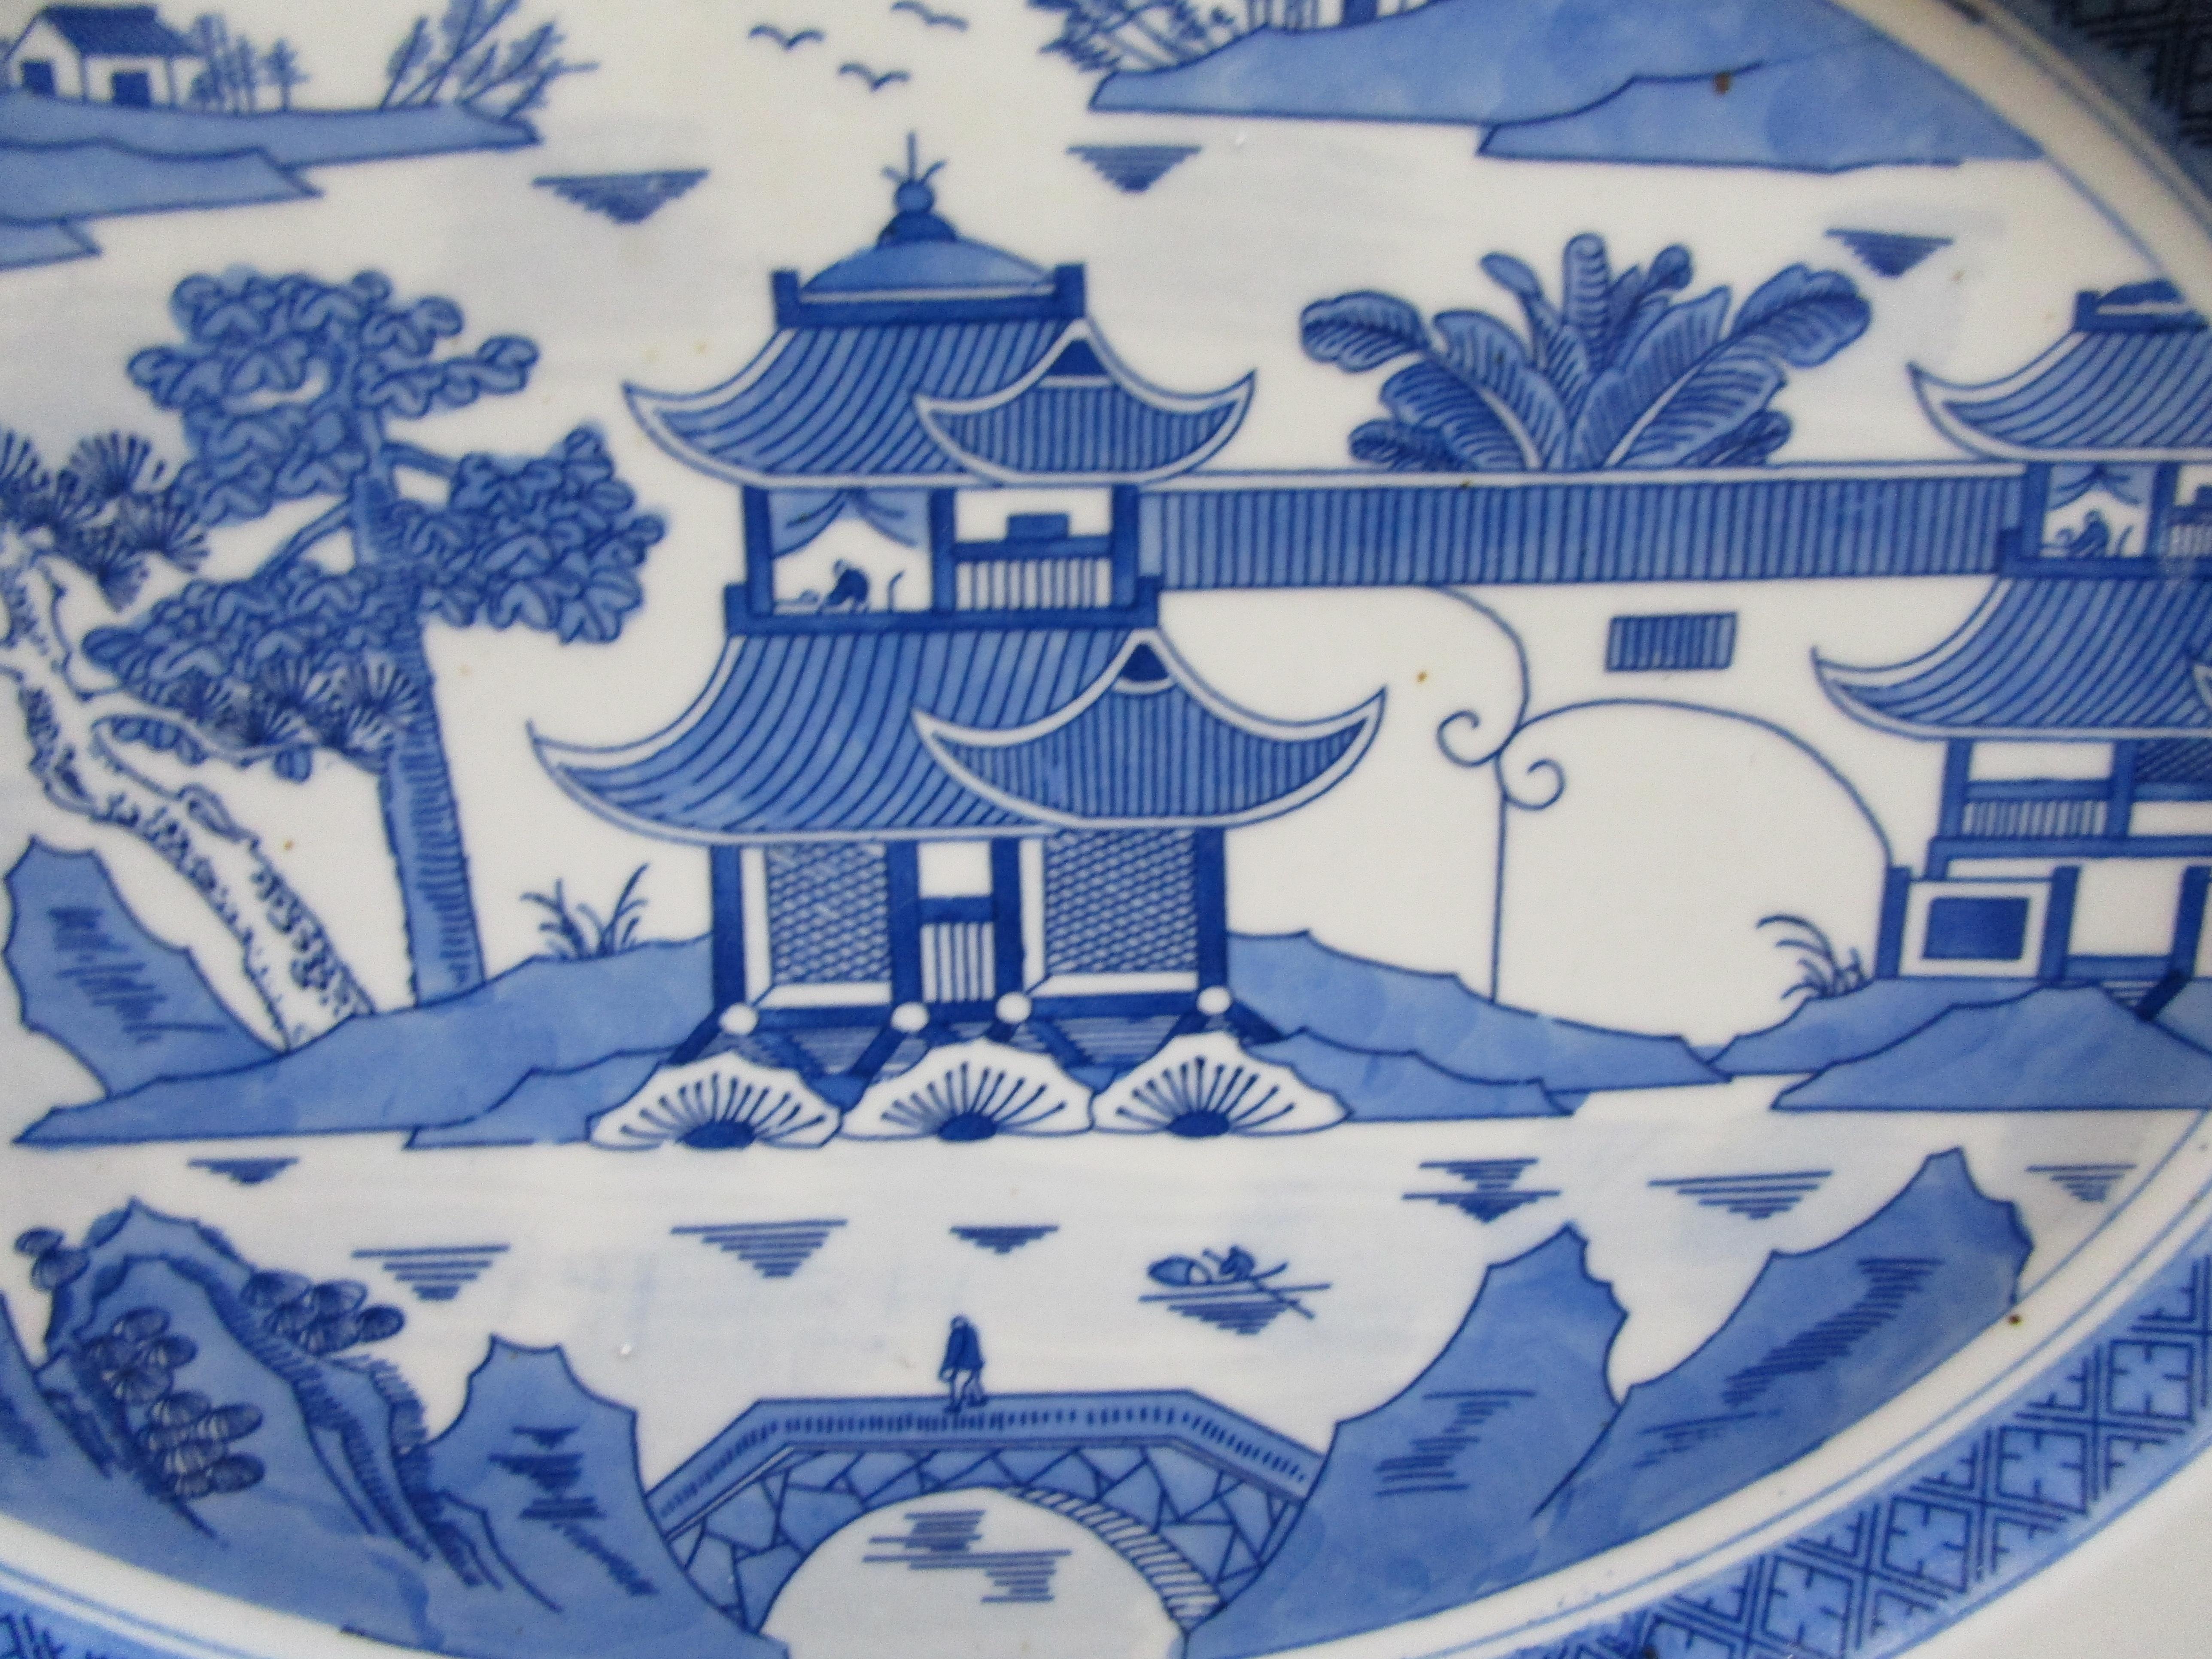 This platter is a wonderful oval platter, Canton ware in blue and white with a backstamp on the reverse side that says Made in China. This is a mid-century piece of export China. The border on the inner rim is called rain and cloud, which seems to